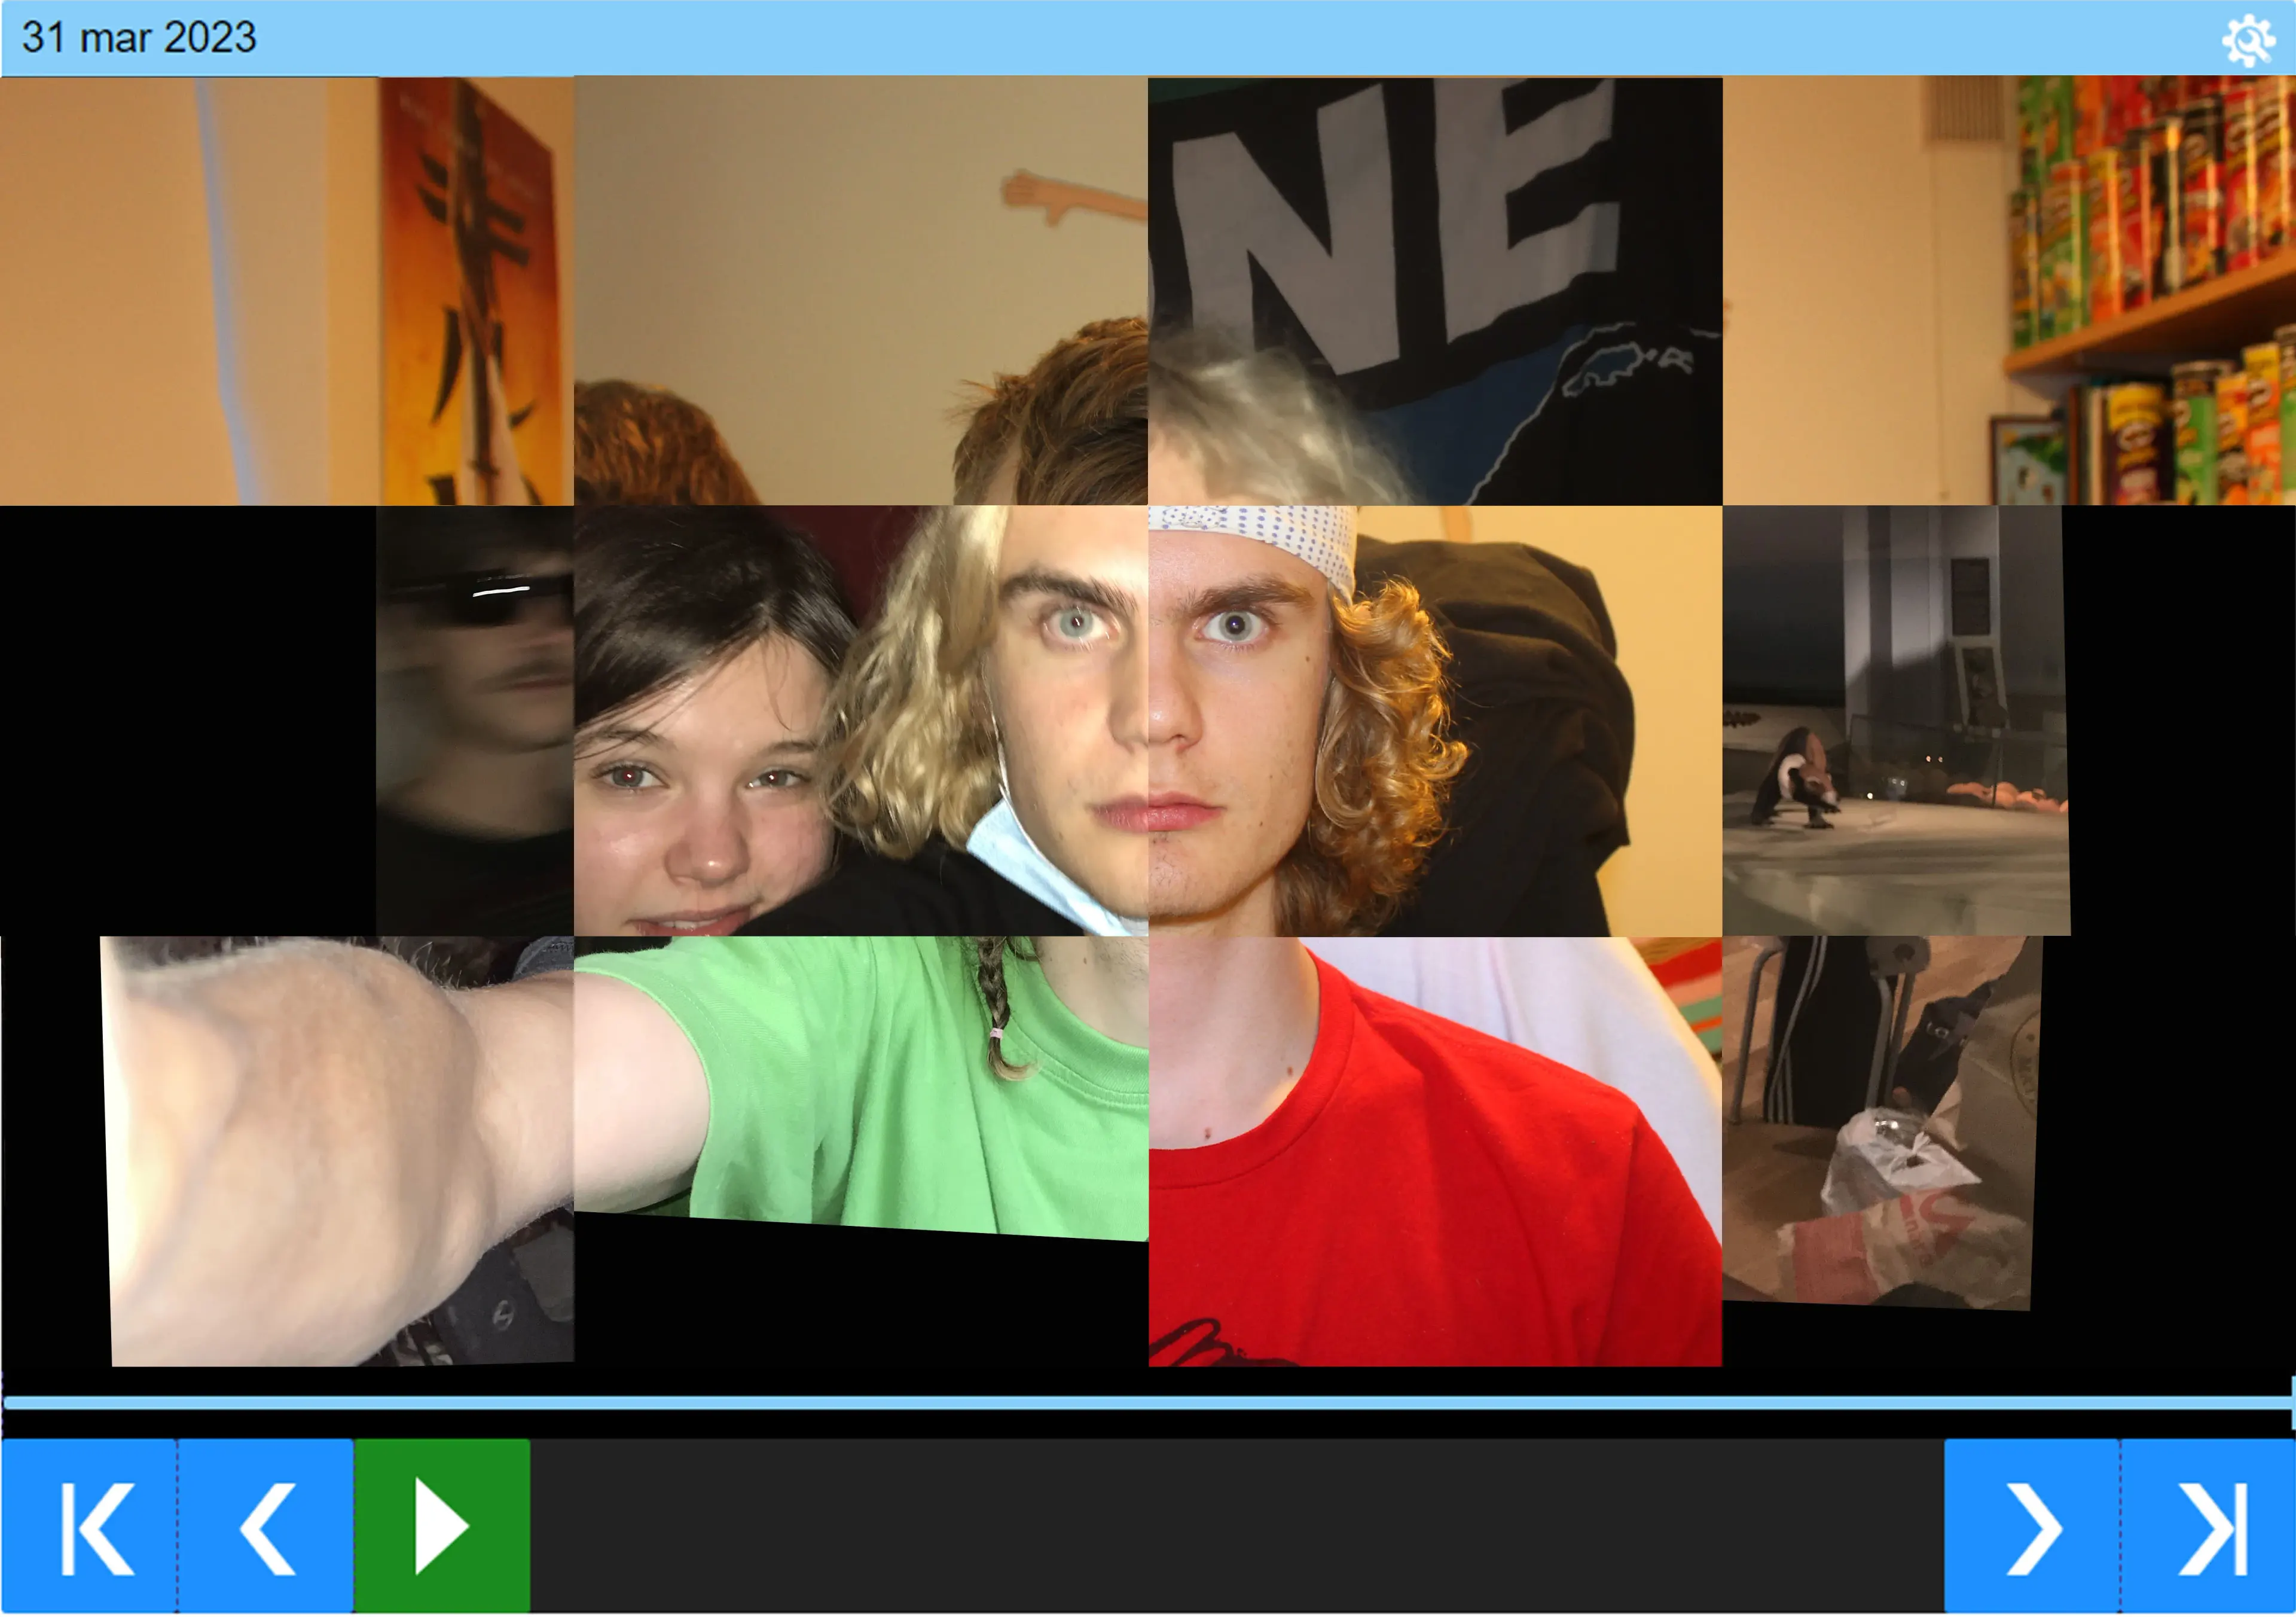 A mosaic of my face in the player